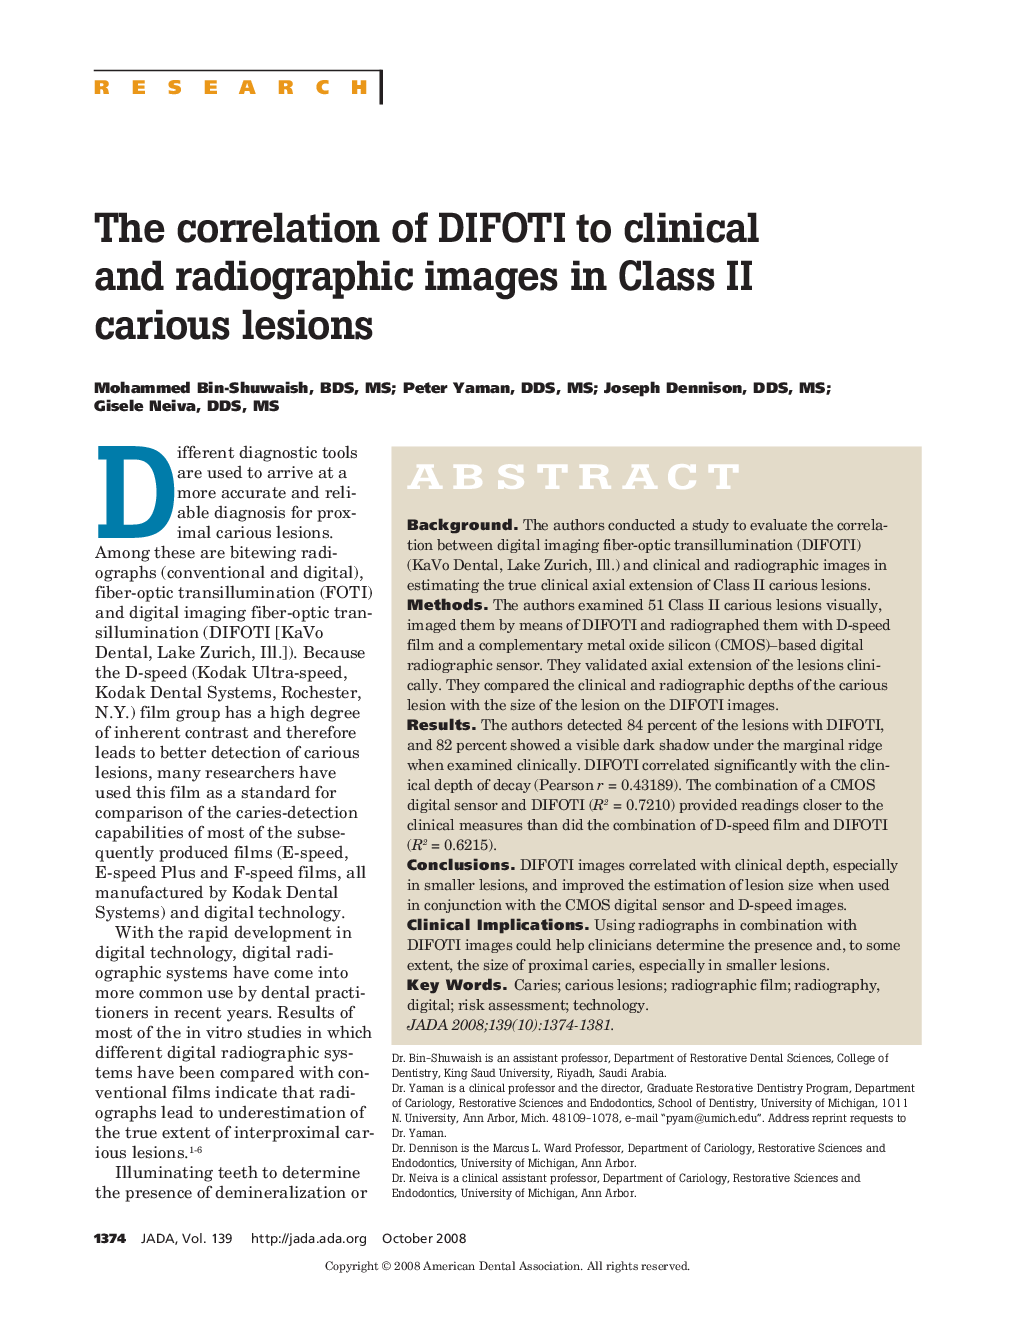 The Correlation of DIFOTI to Clinical and Radiographic Images in Class II Carious Lesions 